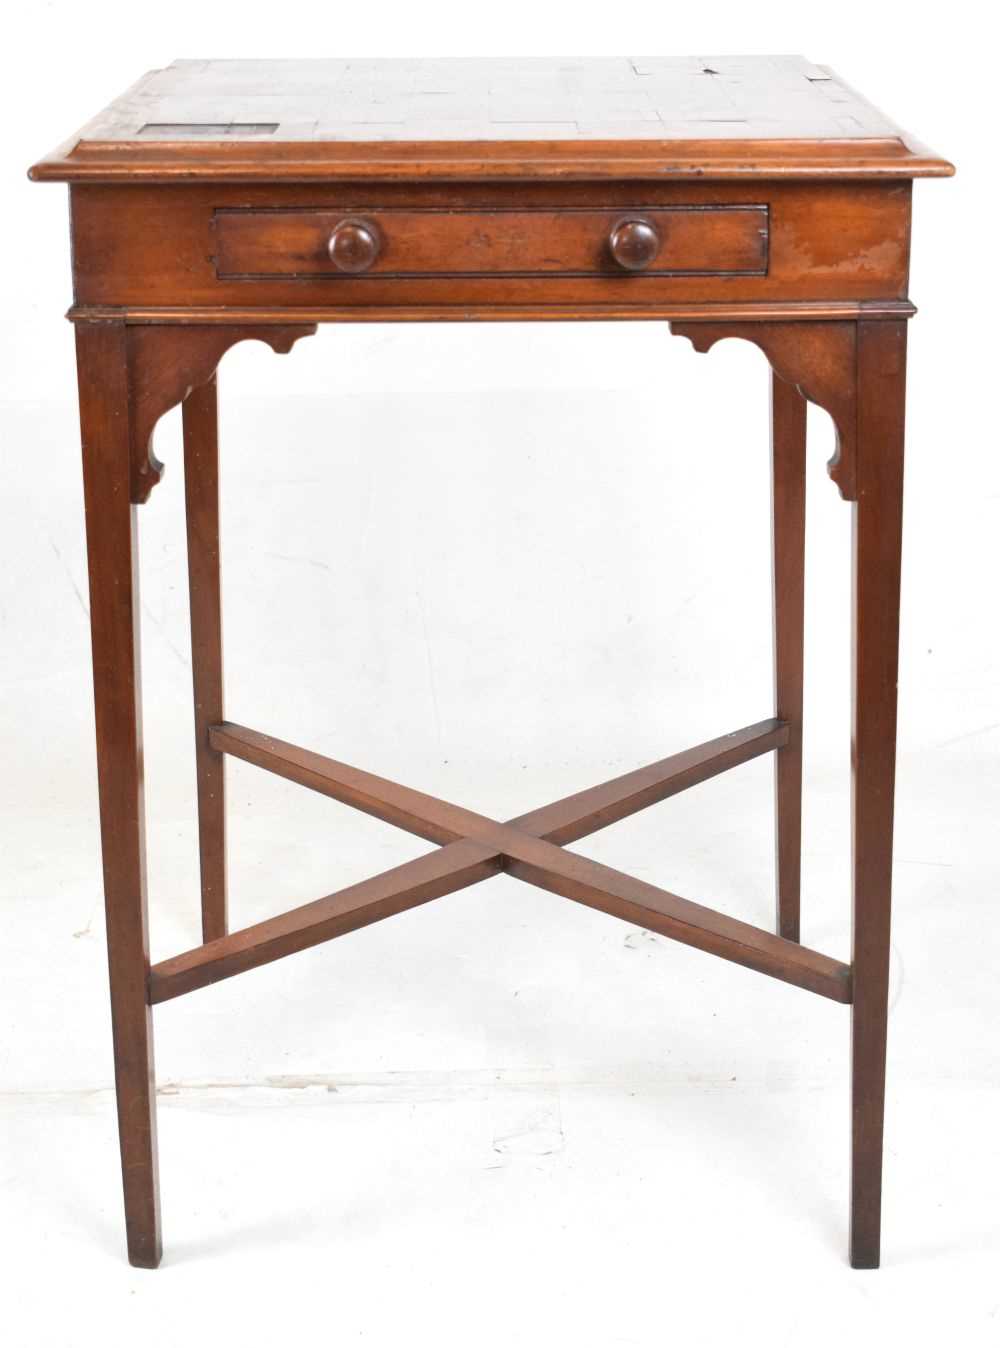 Early 19th Century inlaid walnut games table